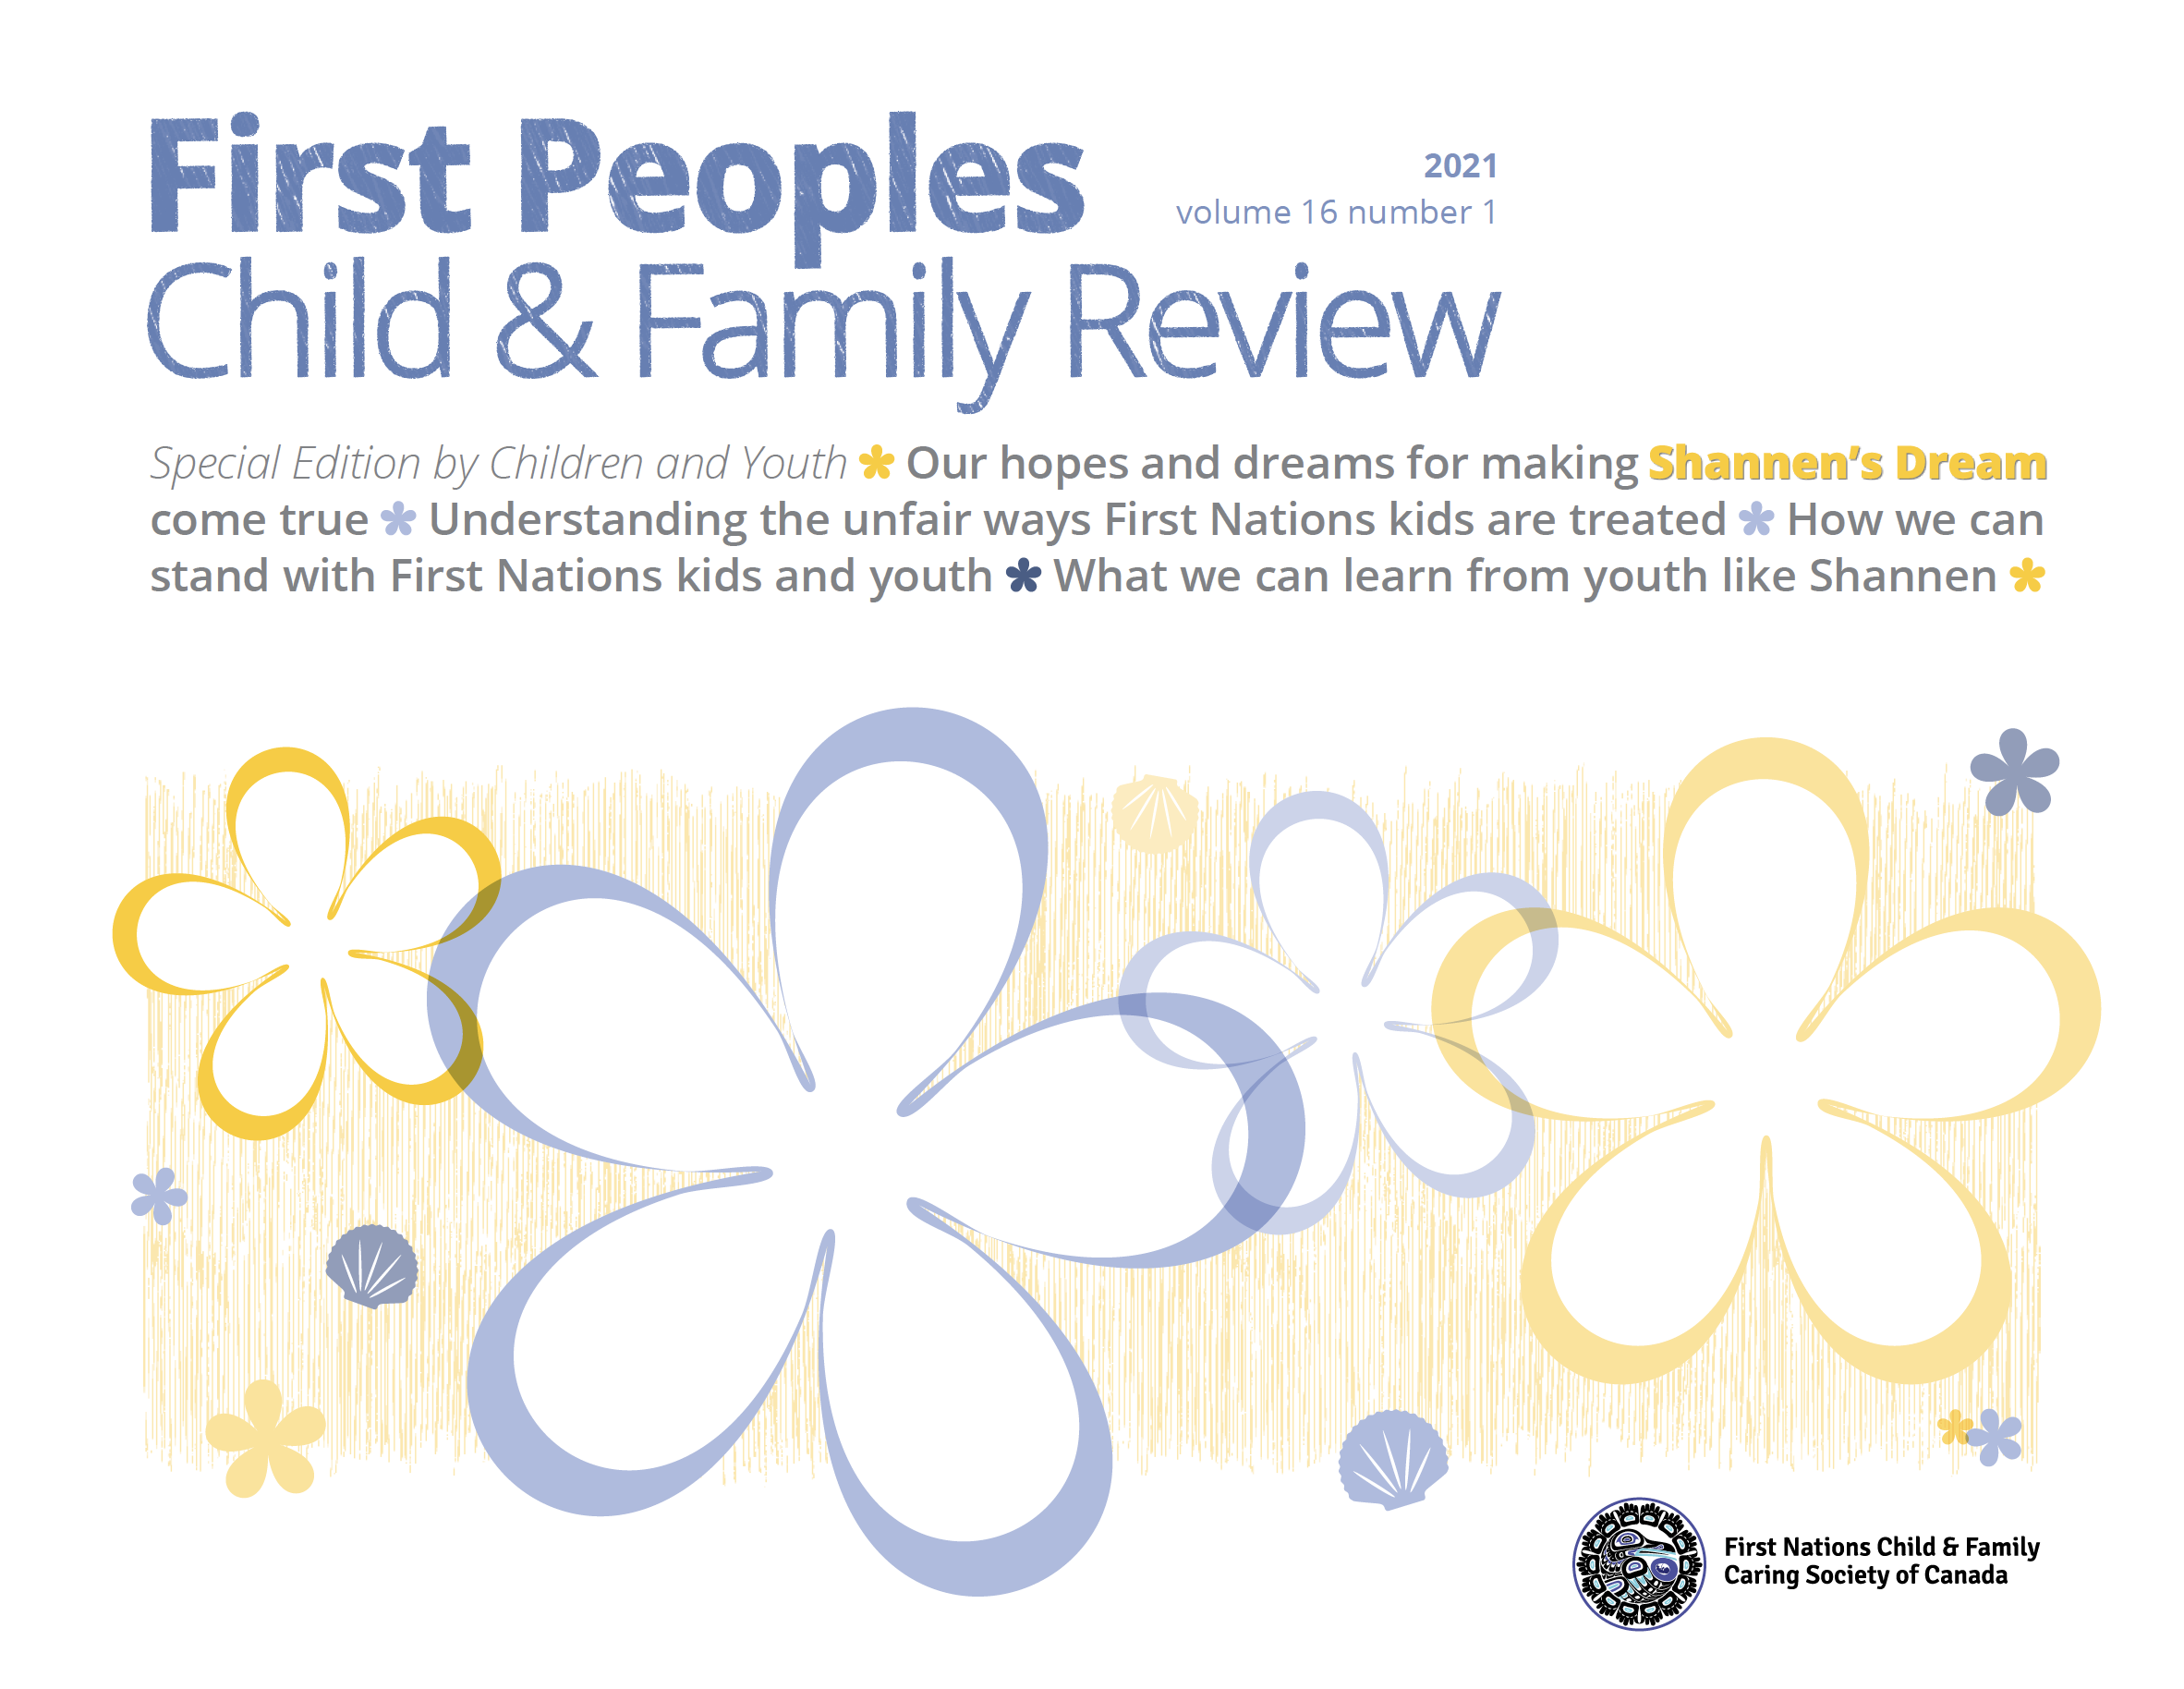 Volume 16, Issue 1 (2021) of the First Peoples Child & Family Review